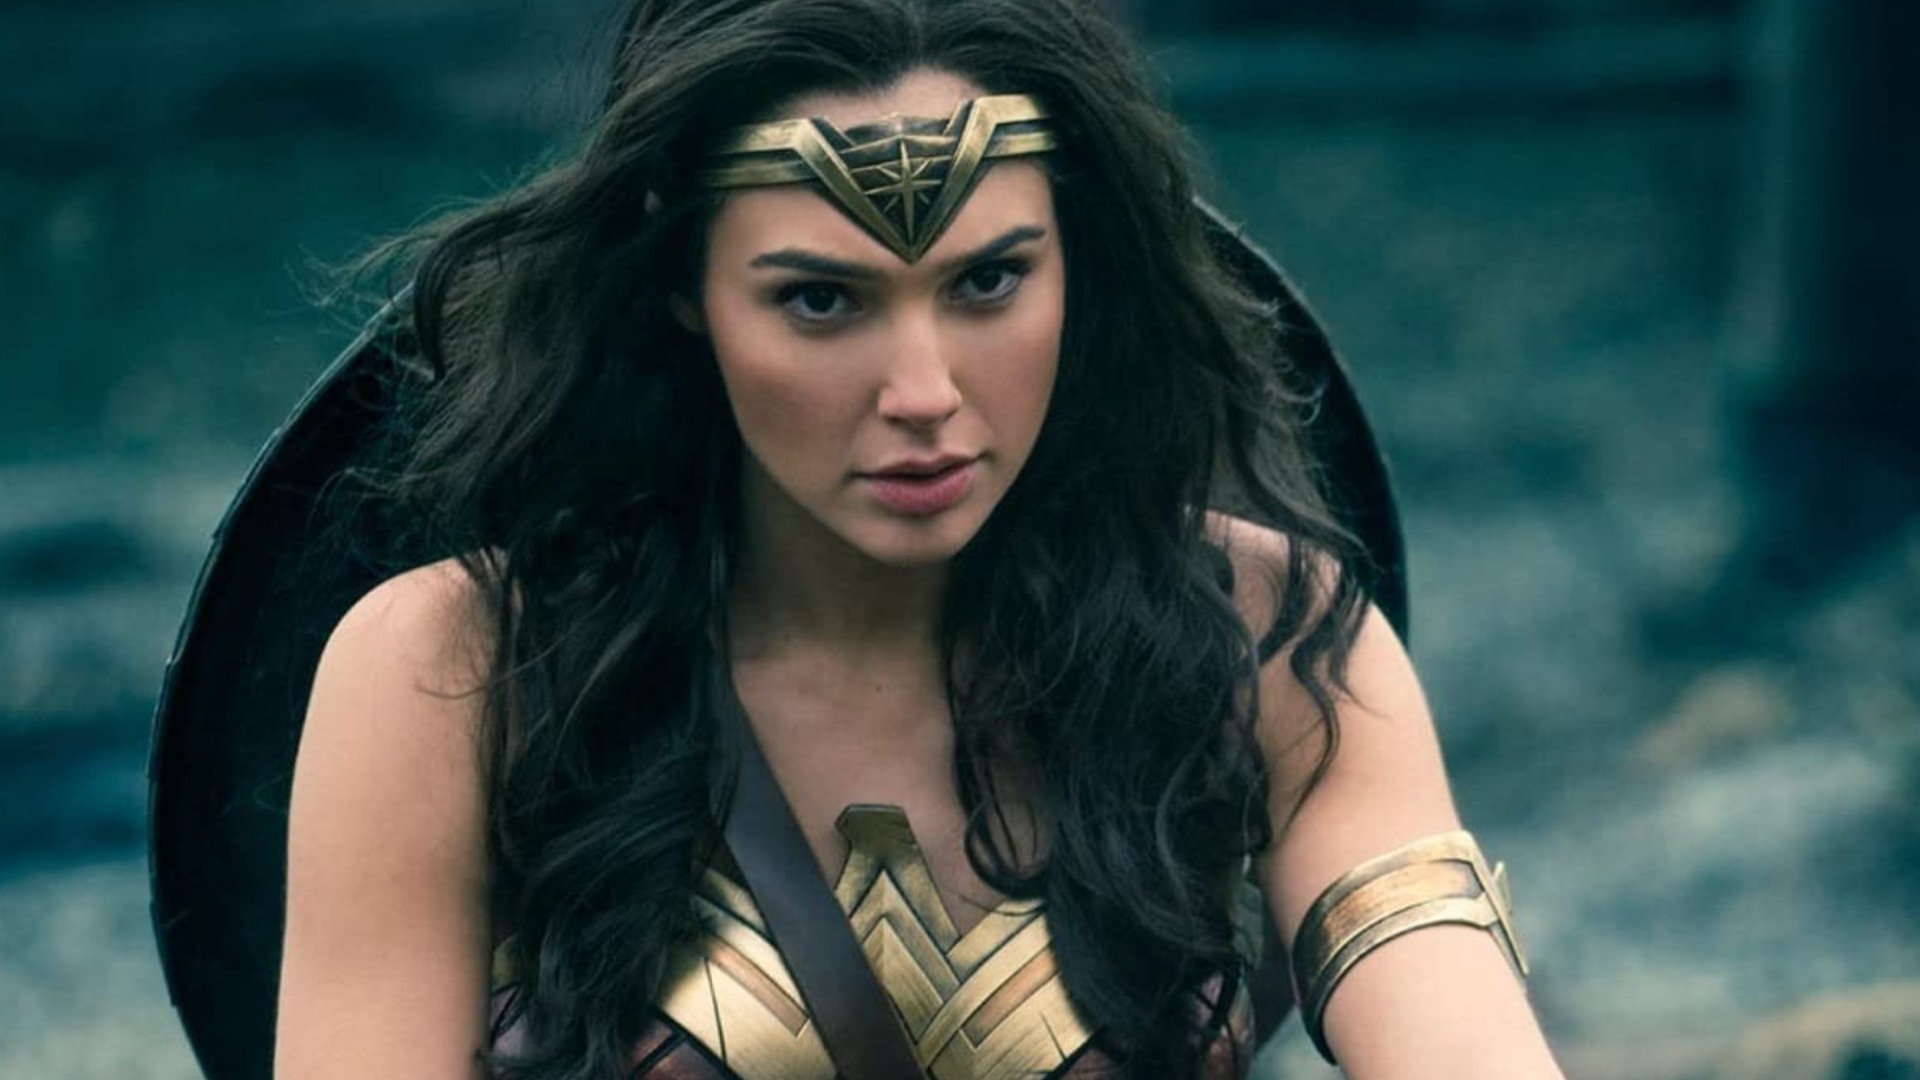  James Gunn speaks out on Wonder Woman 3 and Man of Steel 2 cancellations: We know we aren't going to make every single person happy 